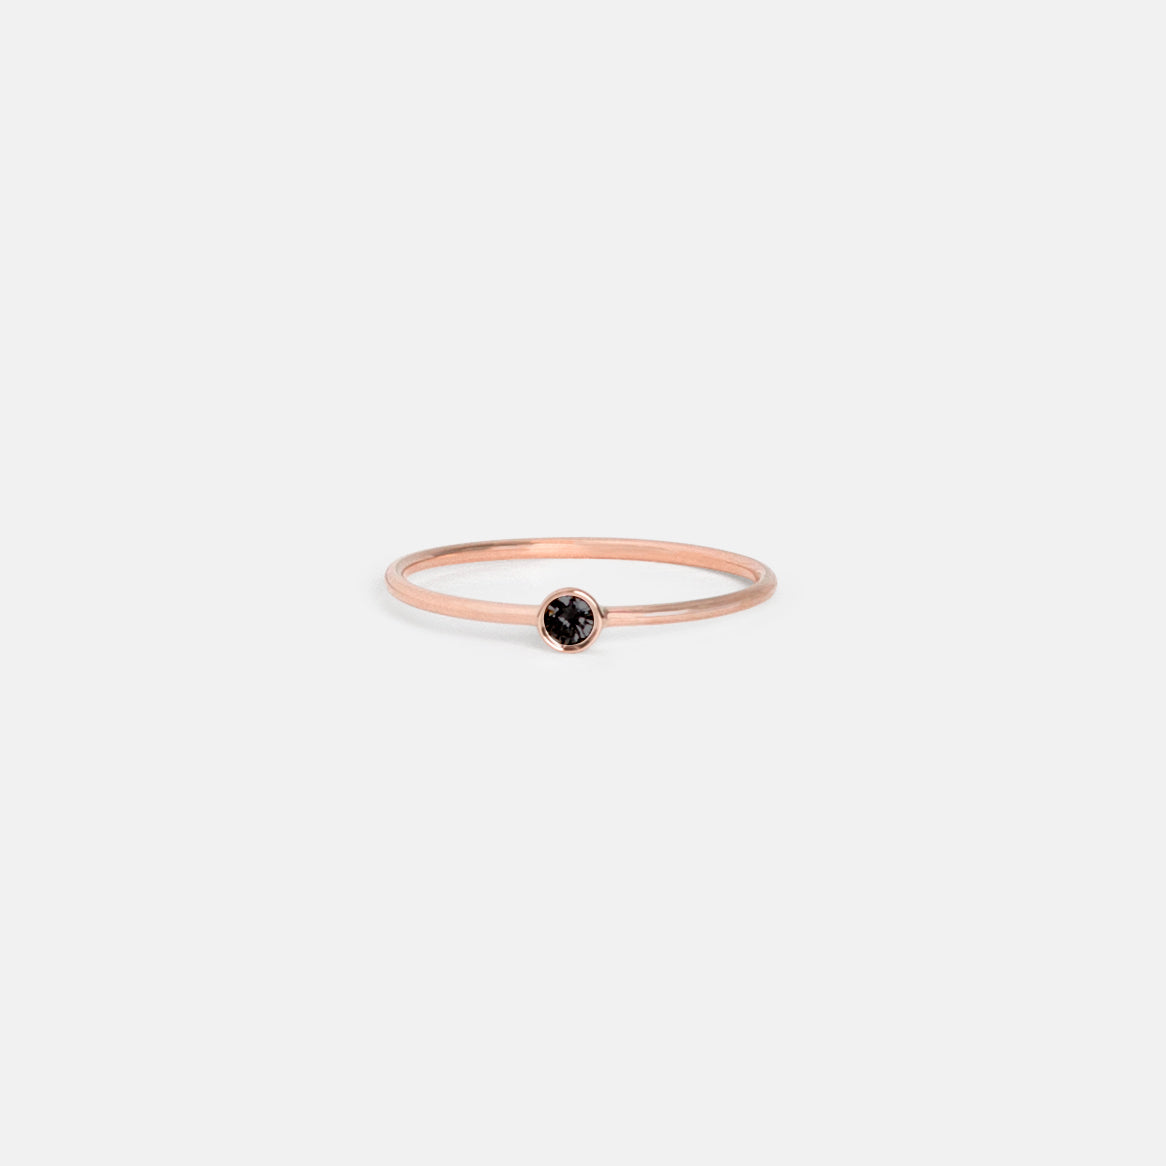 Large Kaya Ring in 14k Rose Gold set with Black Diamond by SHW Fine Jewelry